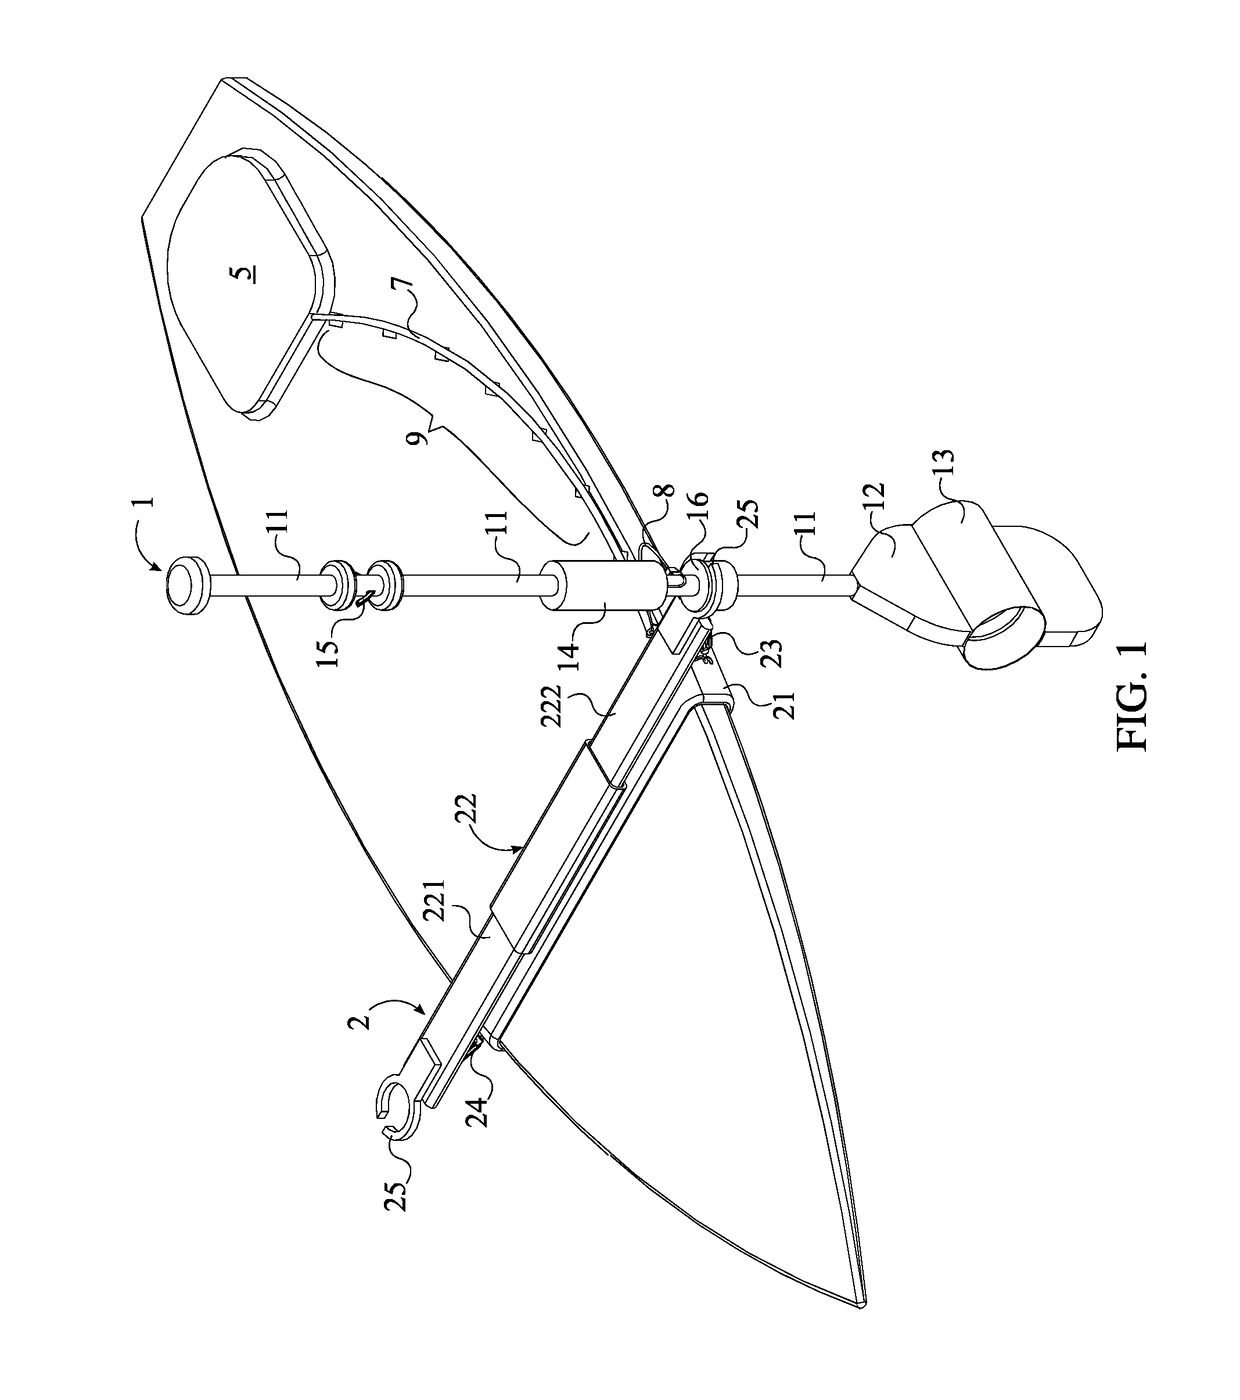 Jet-powered oar system for a paddle board